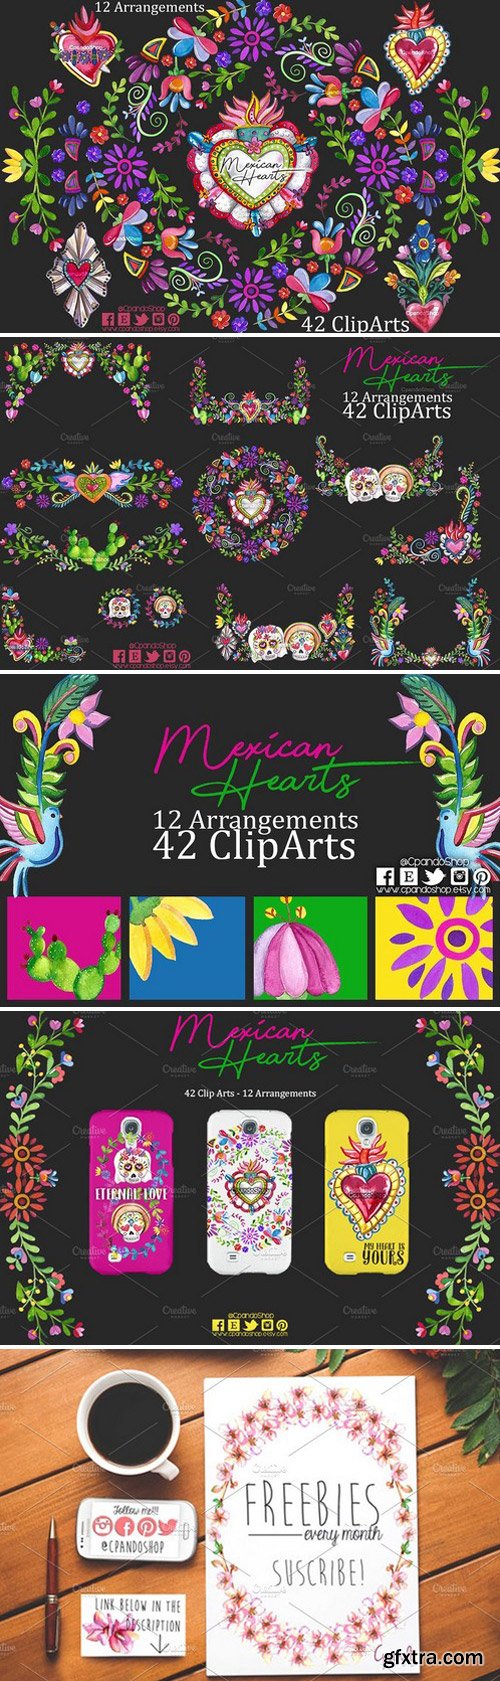 CM - Mexican Hearts - Mexican Valentines 2167599